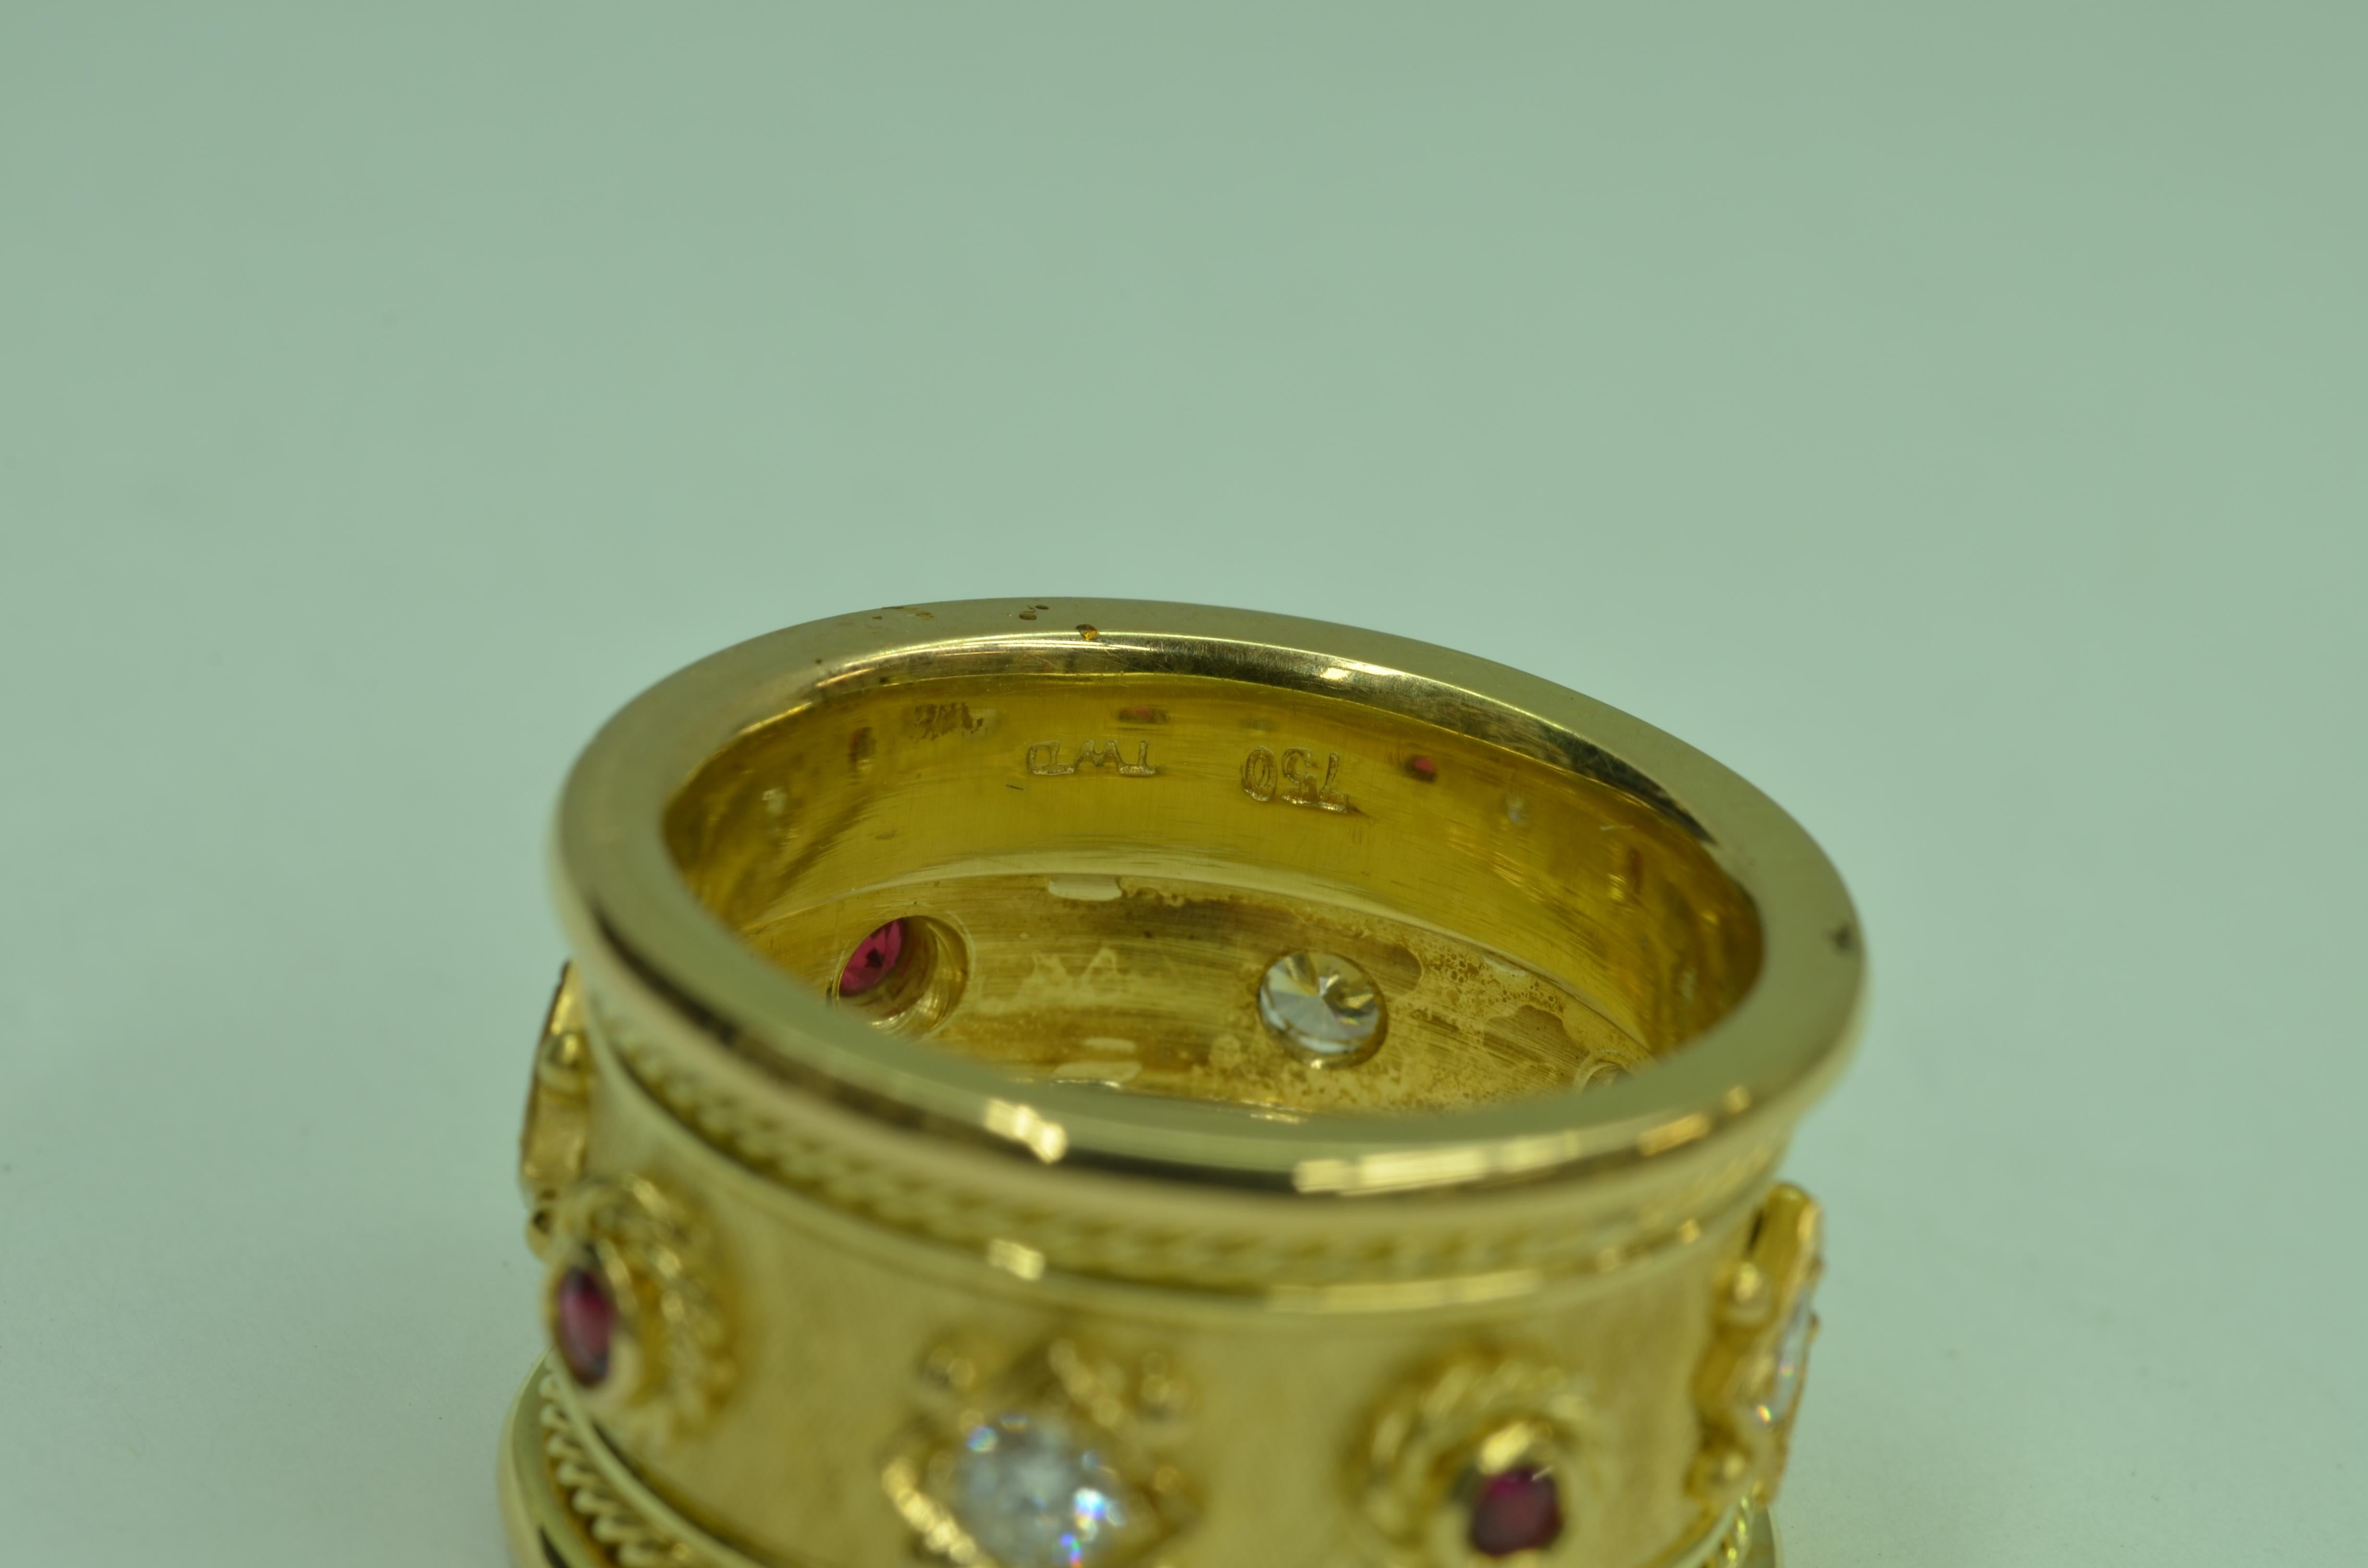 A beautifully hand crafted 18 Karat yellow gold Diamond and Ruby cigar Band ring. I recently completed this striking cigar band at my studio in Maine, entirely hand made in 18 Karat gold. Set with four round brilliant cut Diamonds and four round